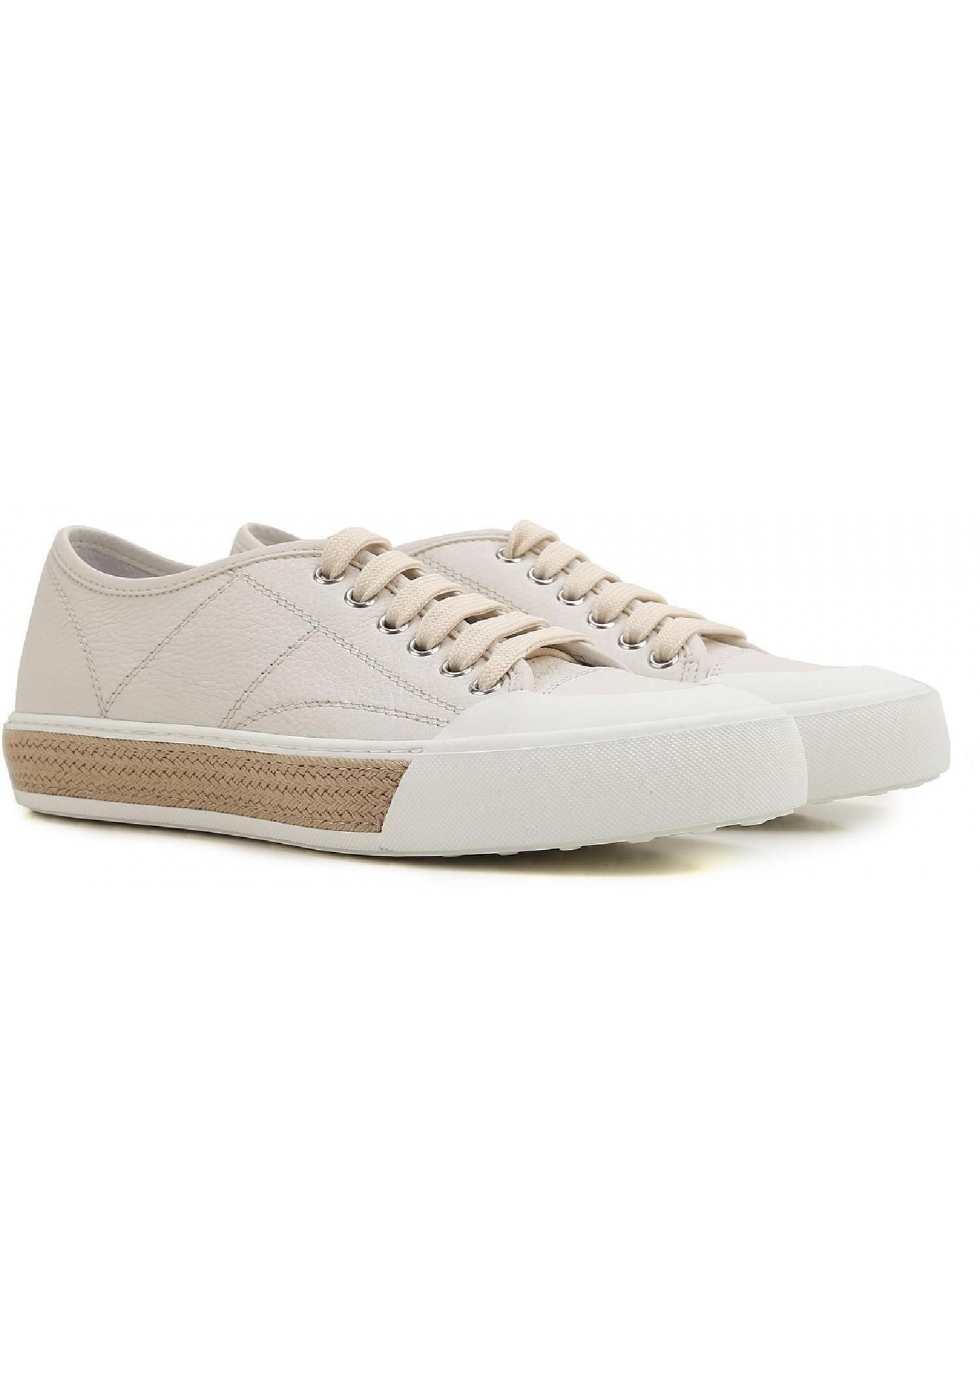 tods womens sneakers